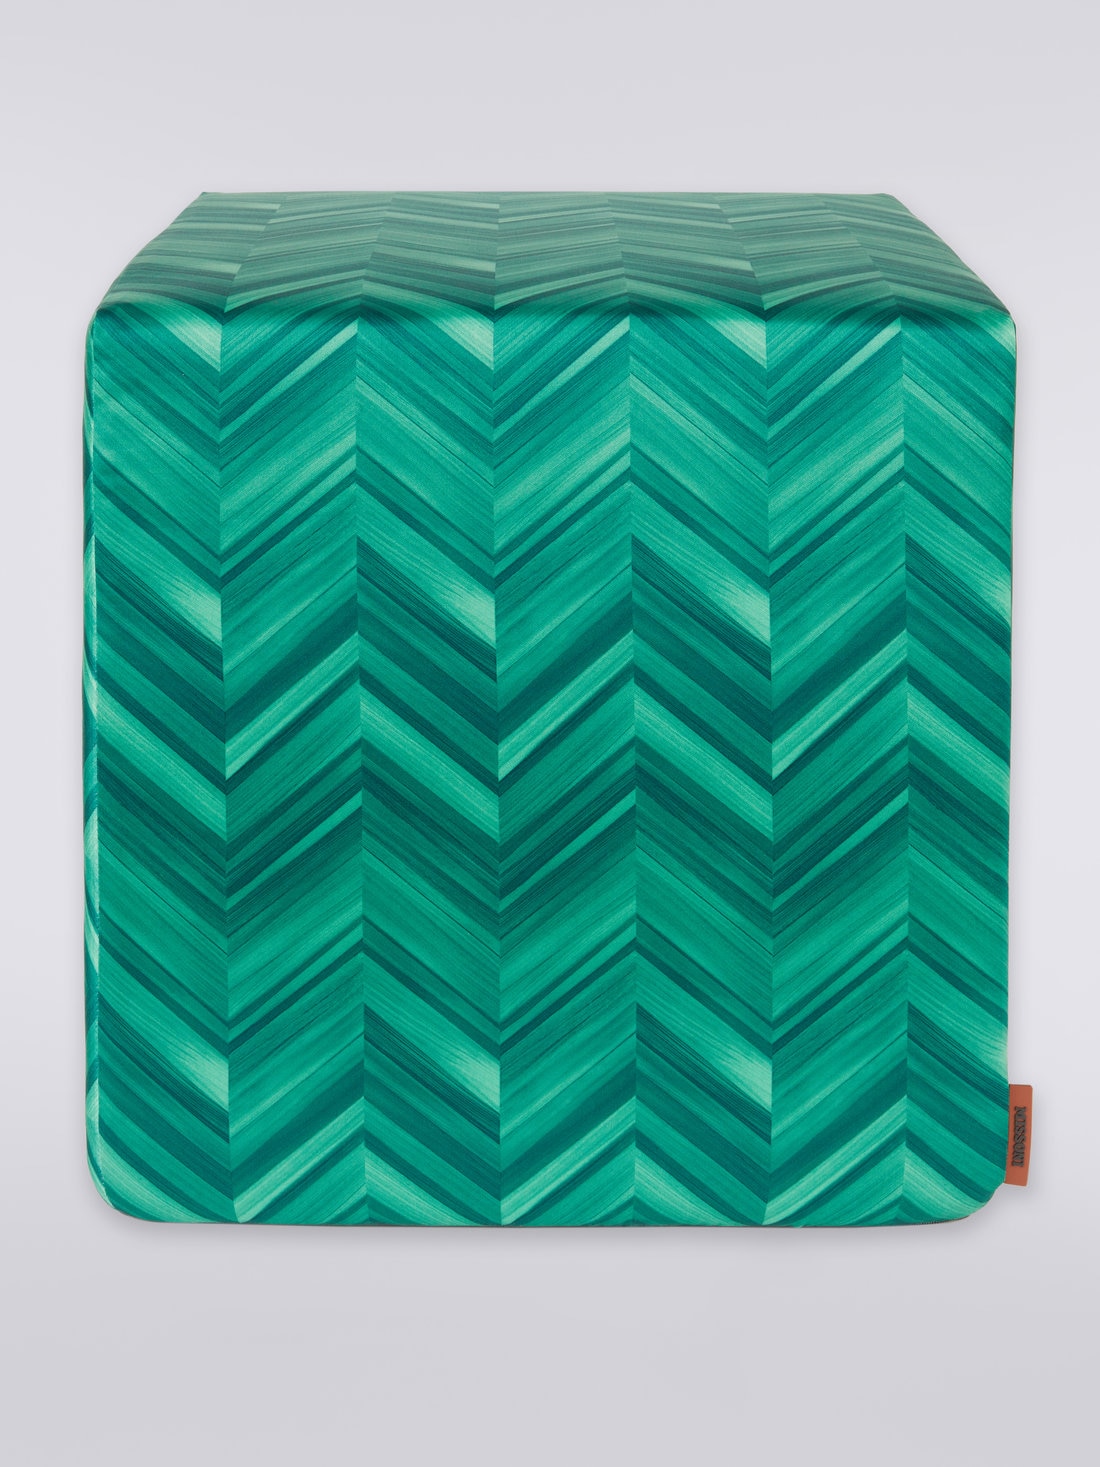 Layers 40x40x40 cm footstool cube in chevron cotton sateen, Multicoloured  - 8051575840784 - 0